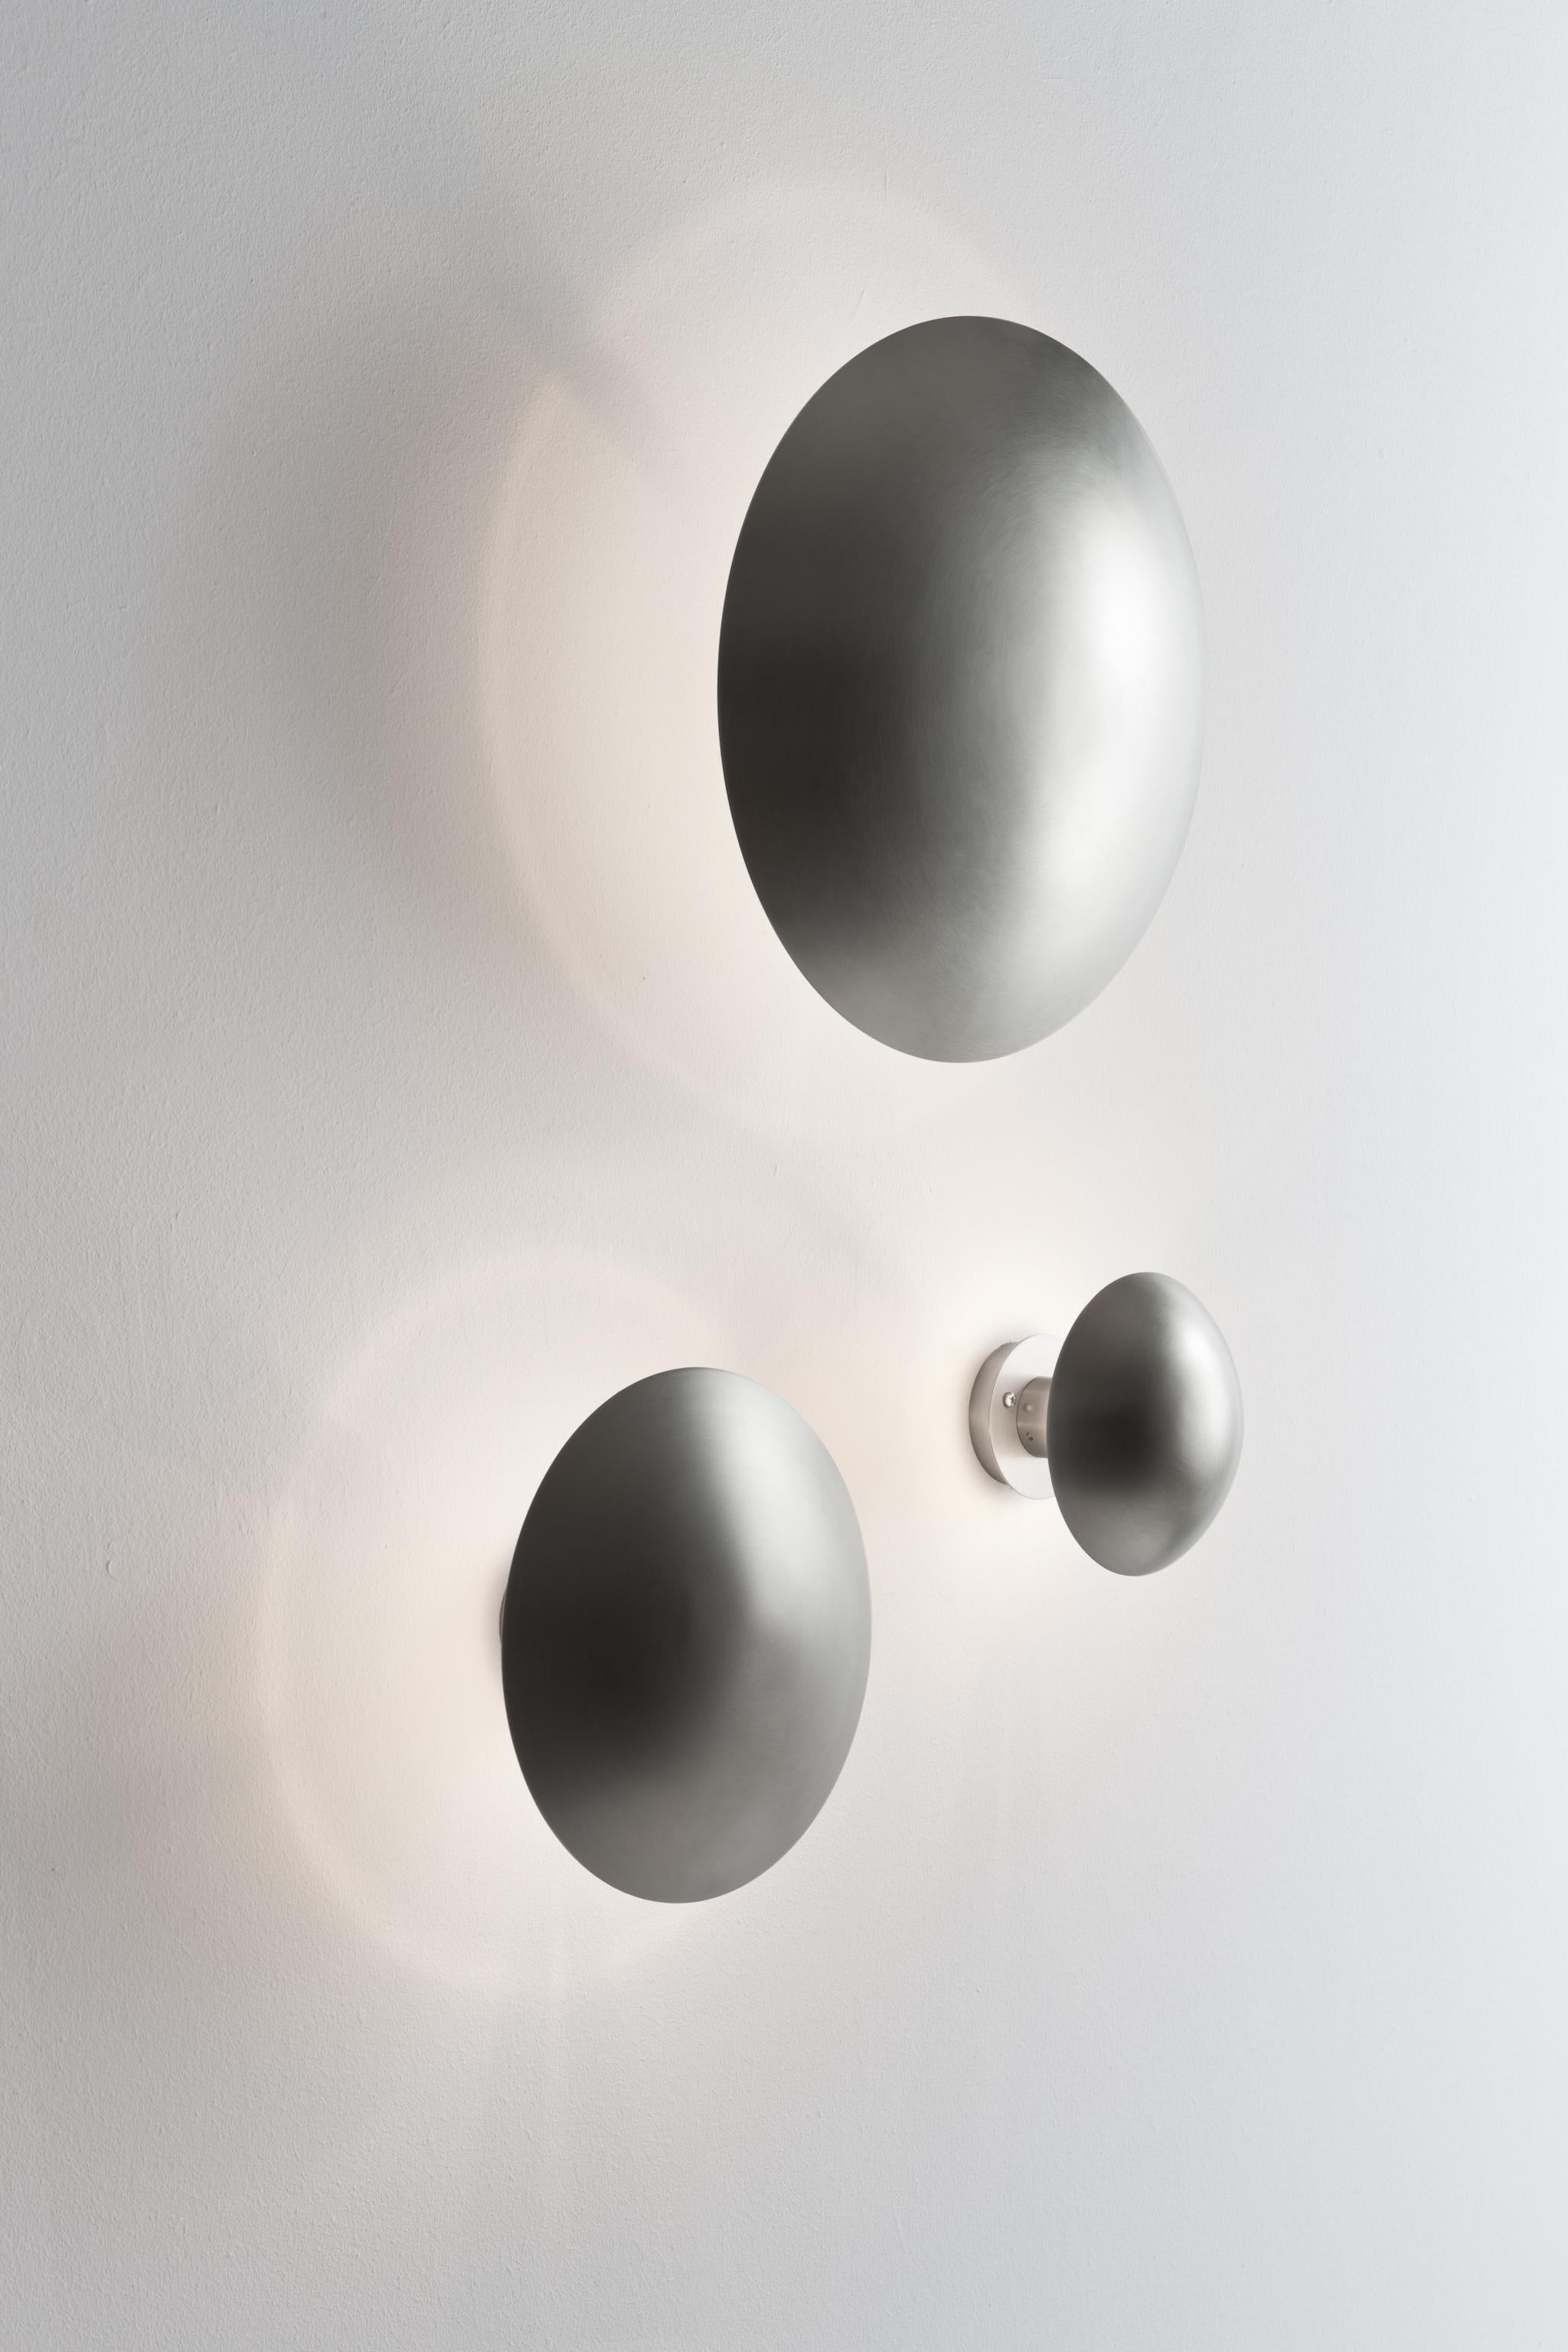 Design by Jordi Mirabell and Mariona Raventos, 1995.

A disc of molded steel which hides the source of light, giving off a glow around its opaque circle. Available in small.

Measure: Small 6